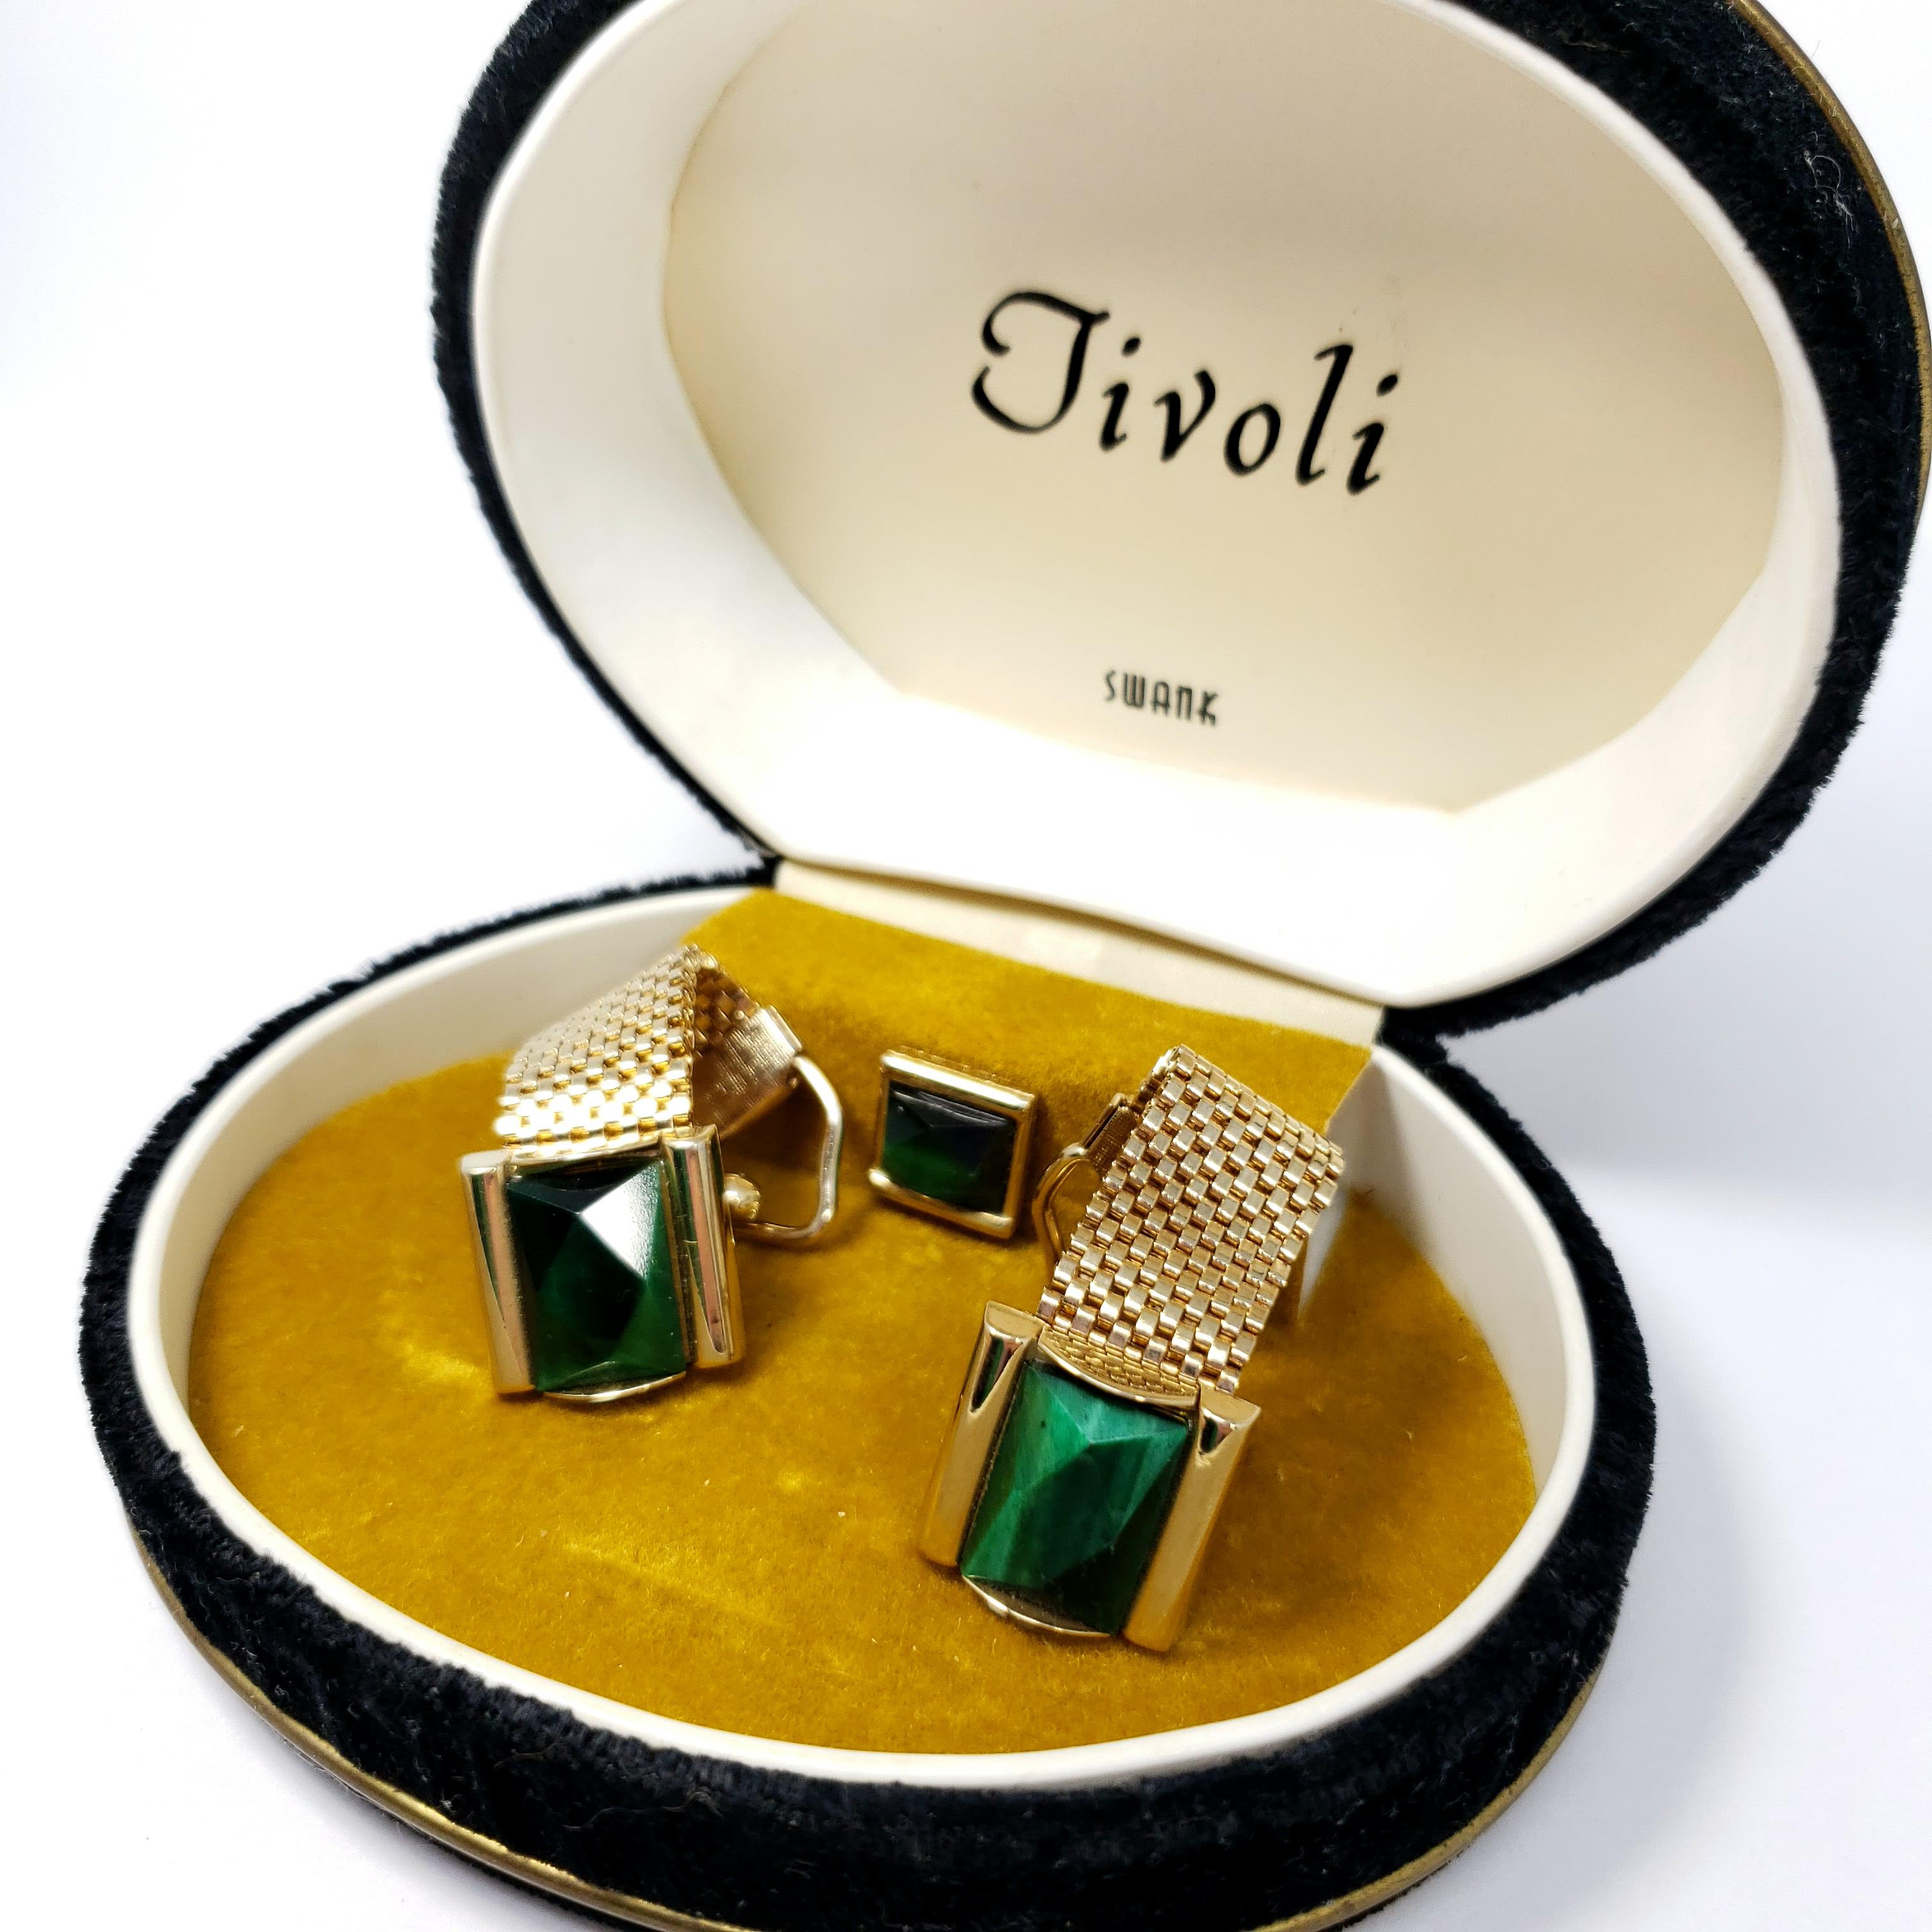 A pair of vintage cuff links and stud. Exquisite gold finish, with malachite crystals and mesh accents.

Good condition with light wear, consistent with age.
